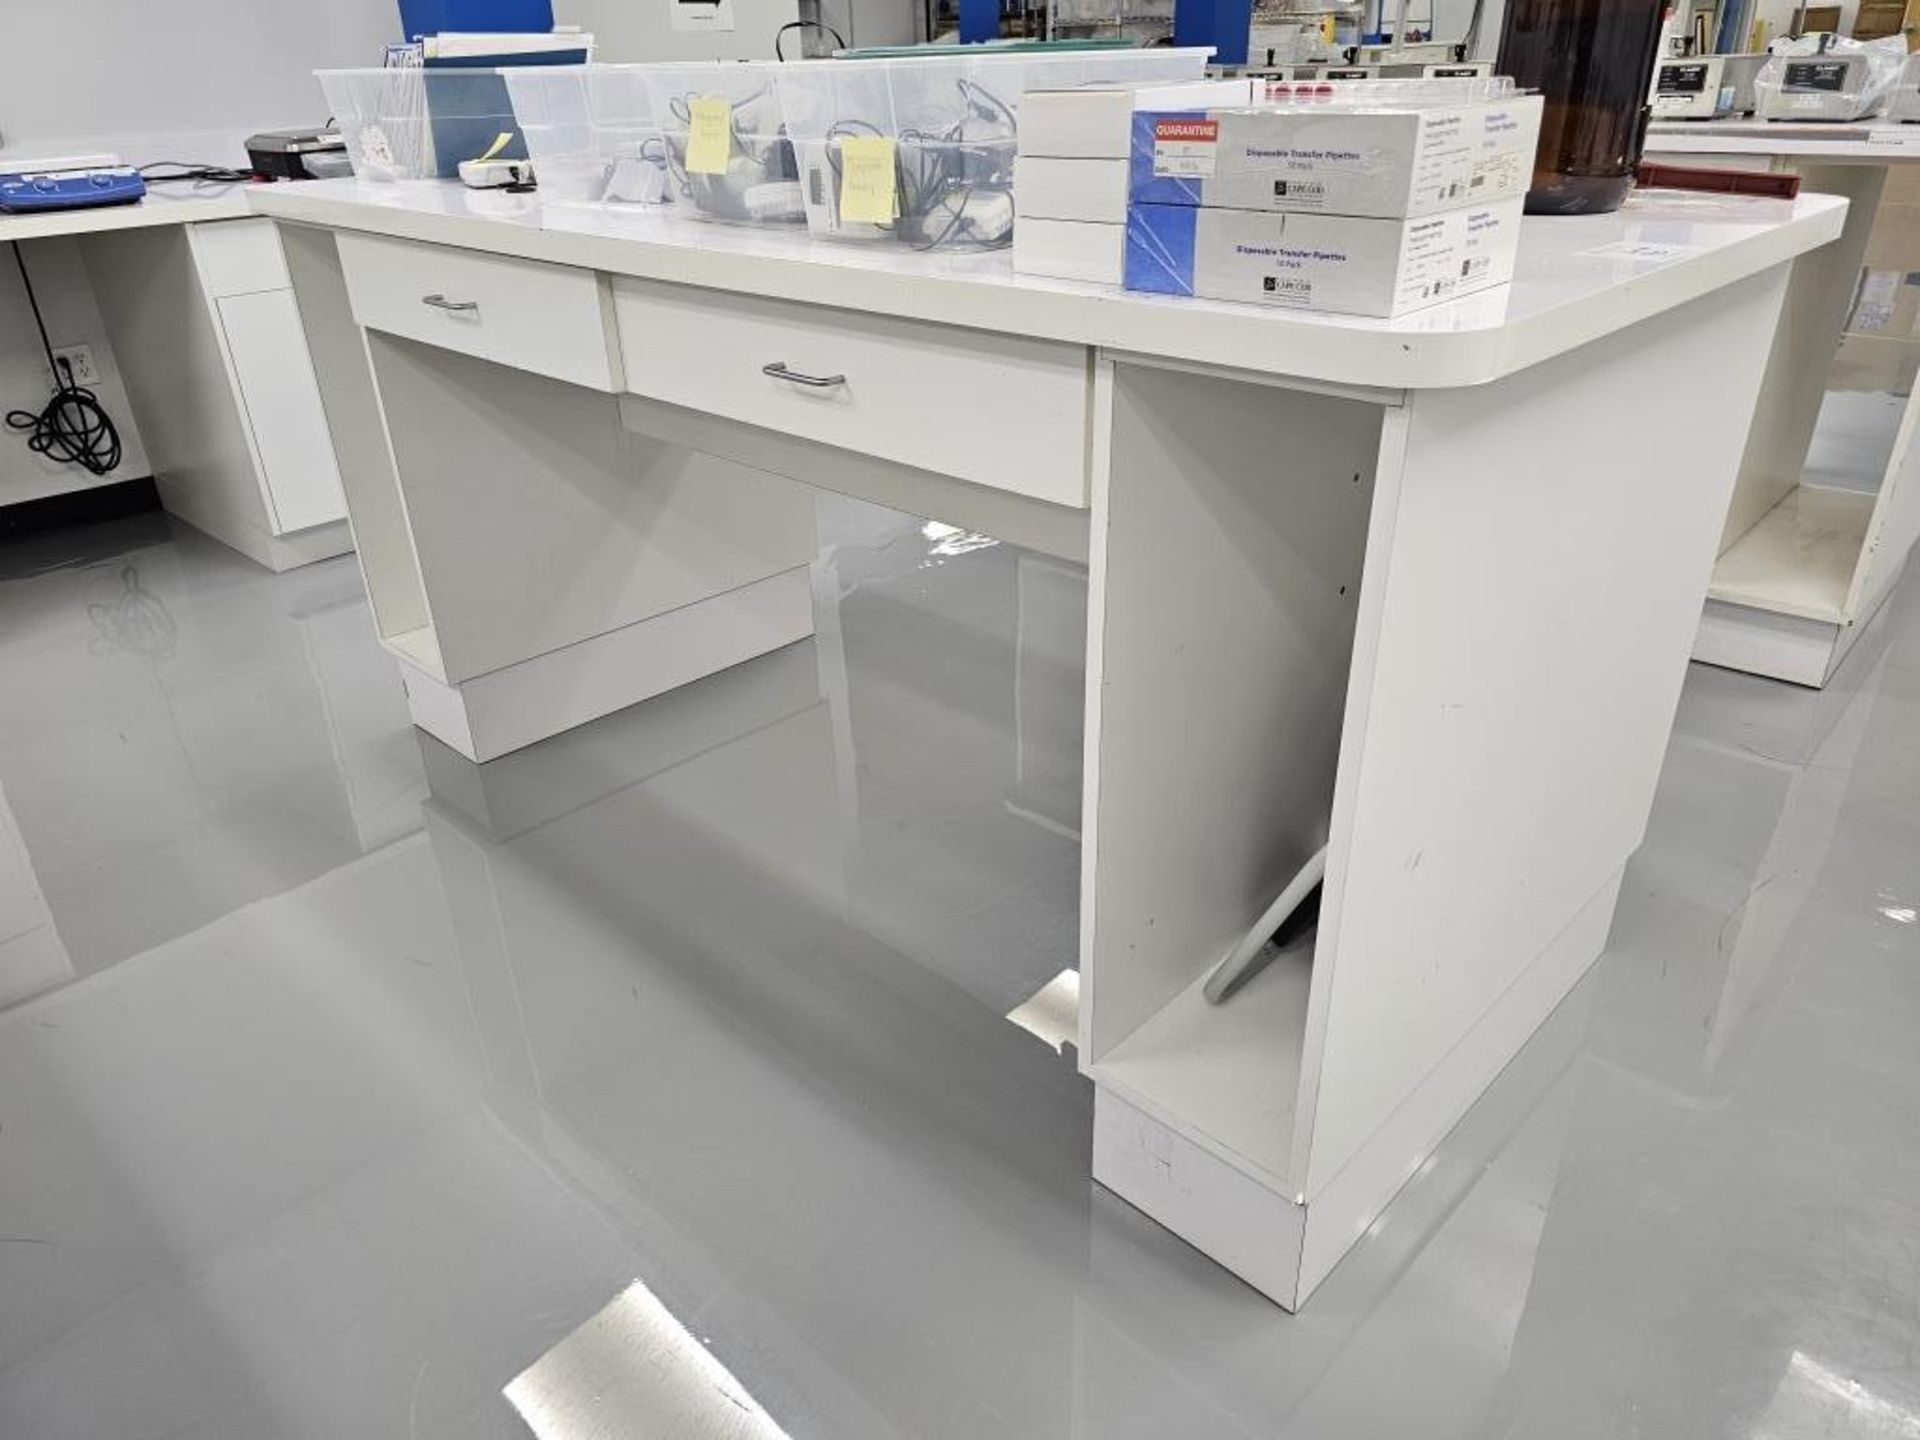 (3) 82" x 38" x 40.5" Double Sided Lab Bench With Drawers and Side Pass Through Storage Areas - Image 4 of 6